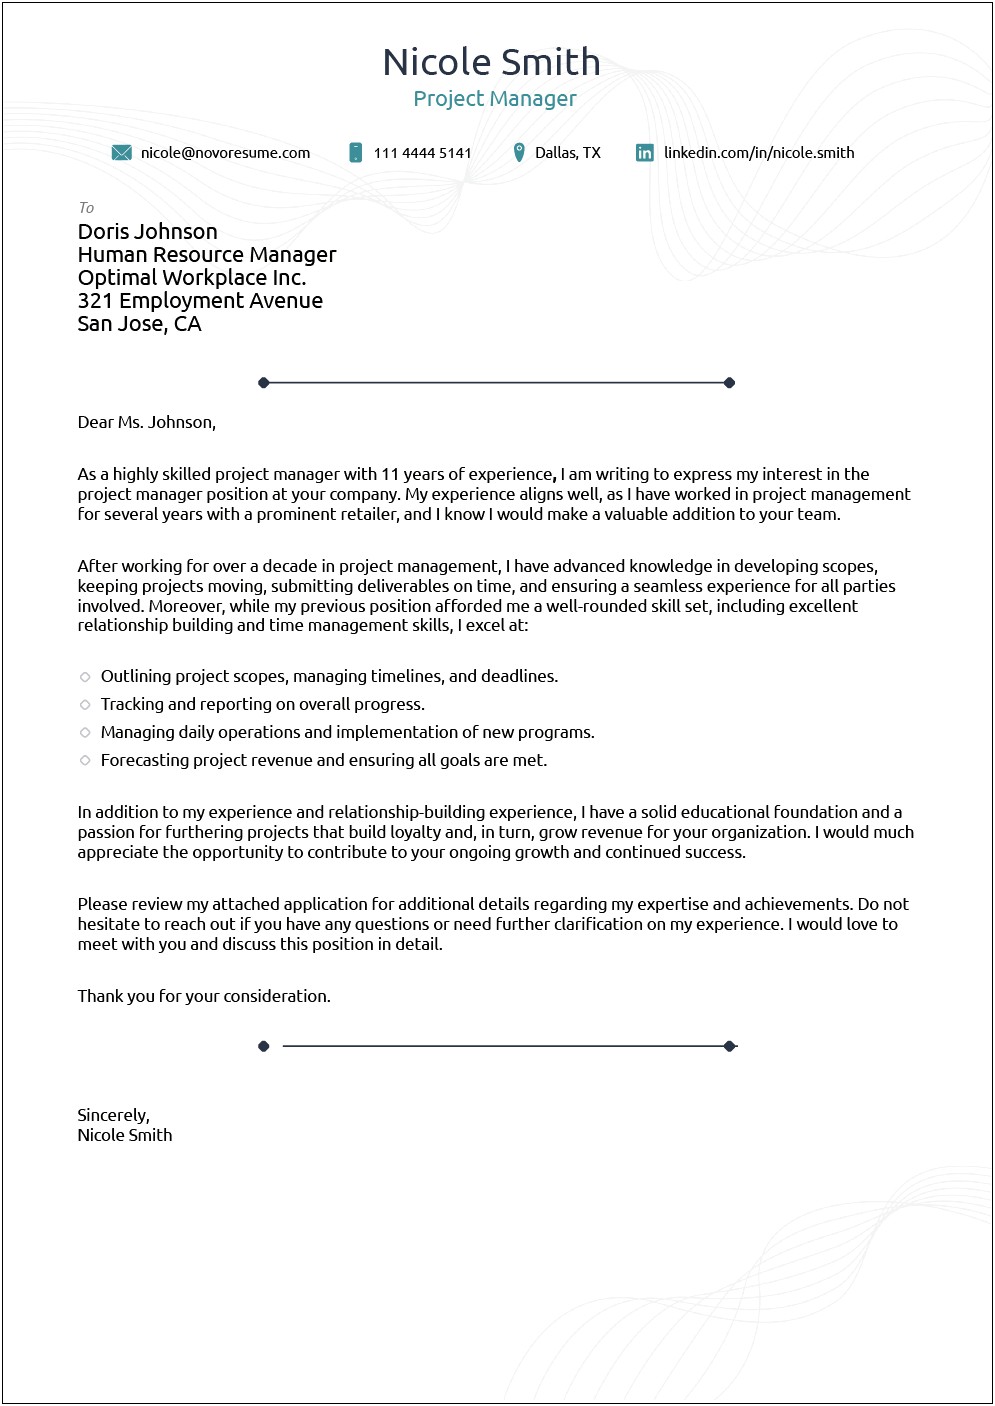 resume mail body format